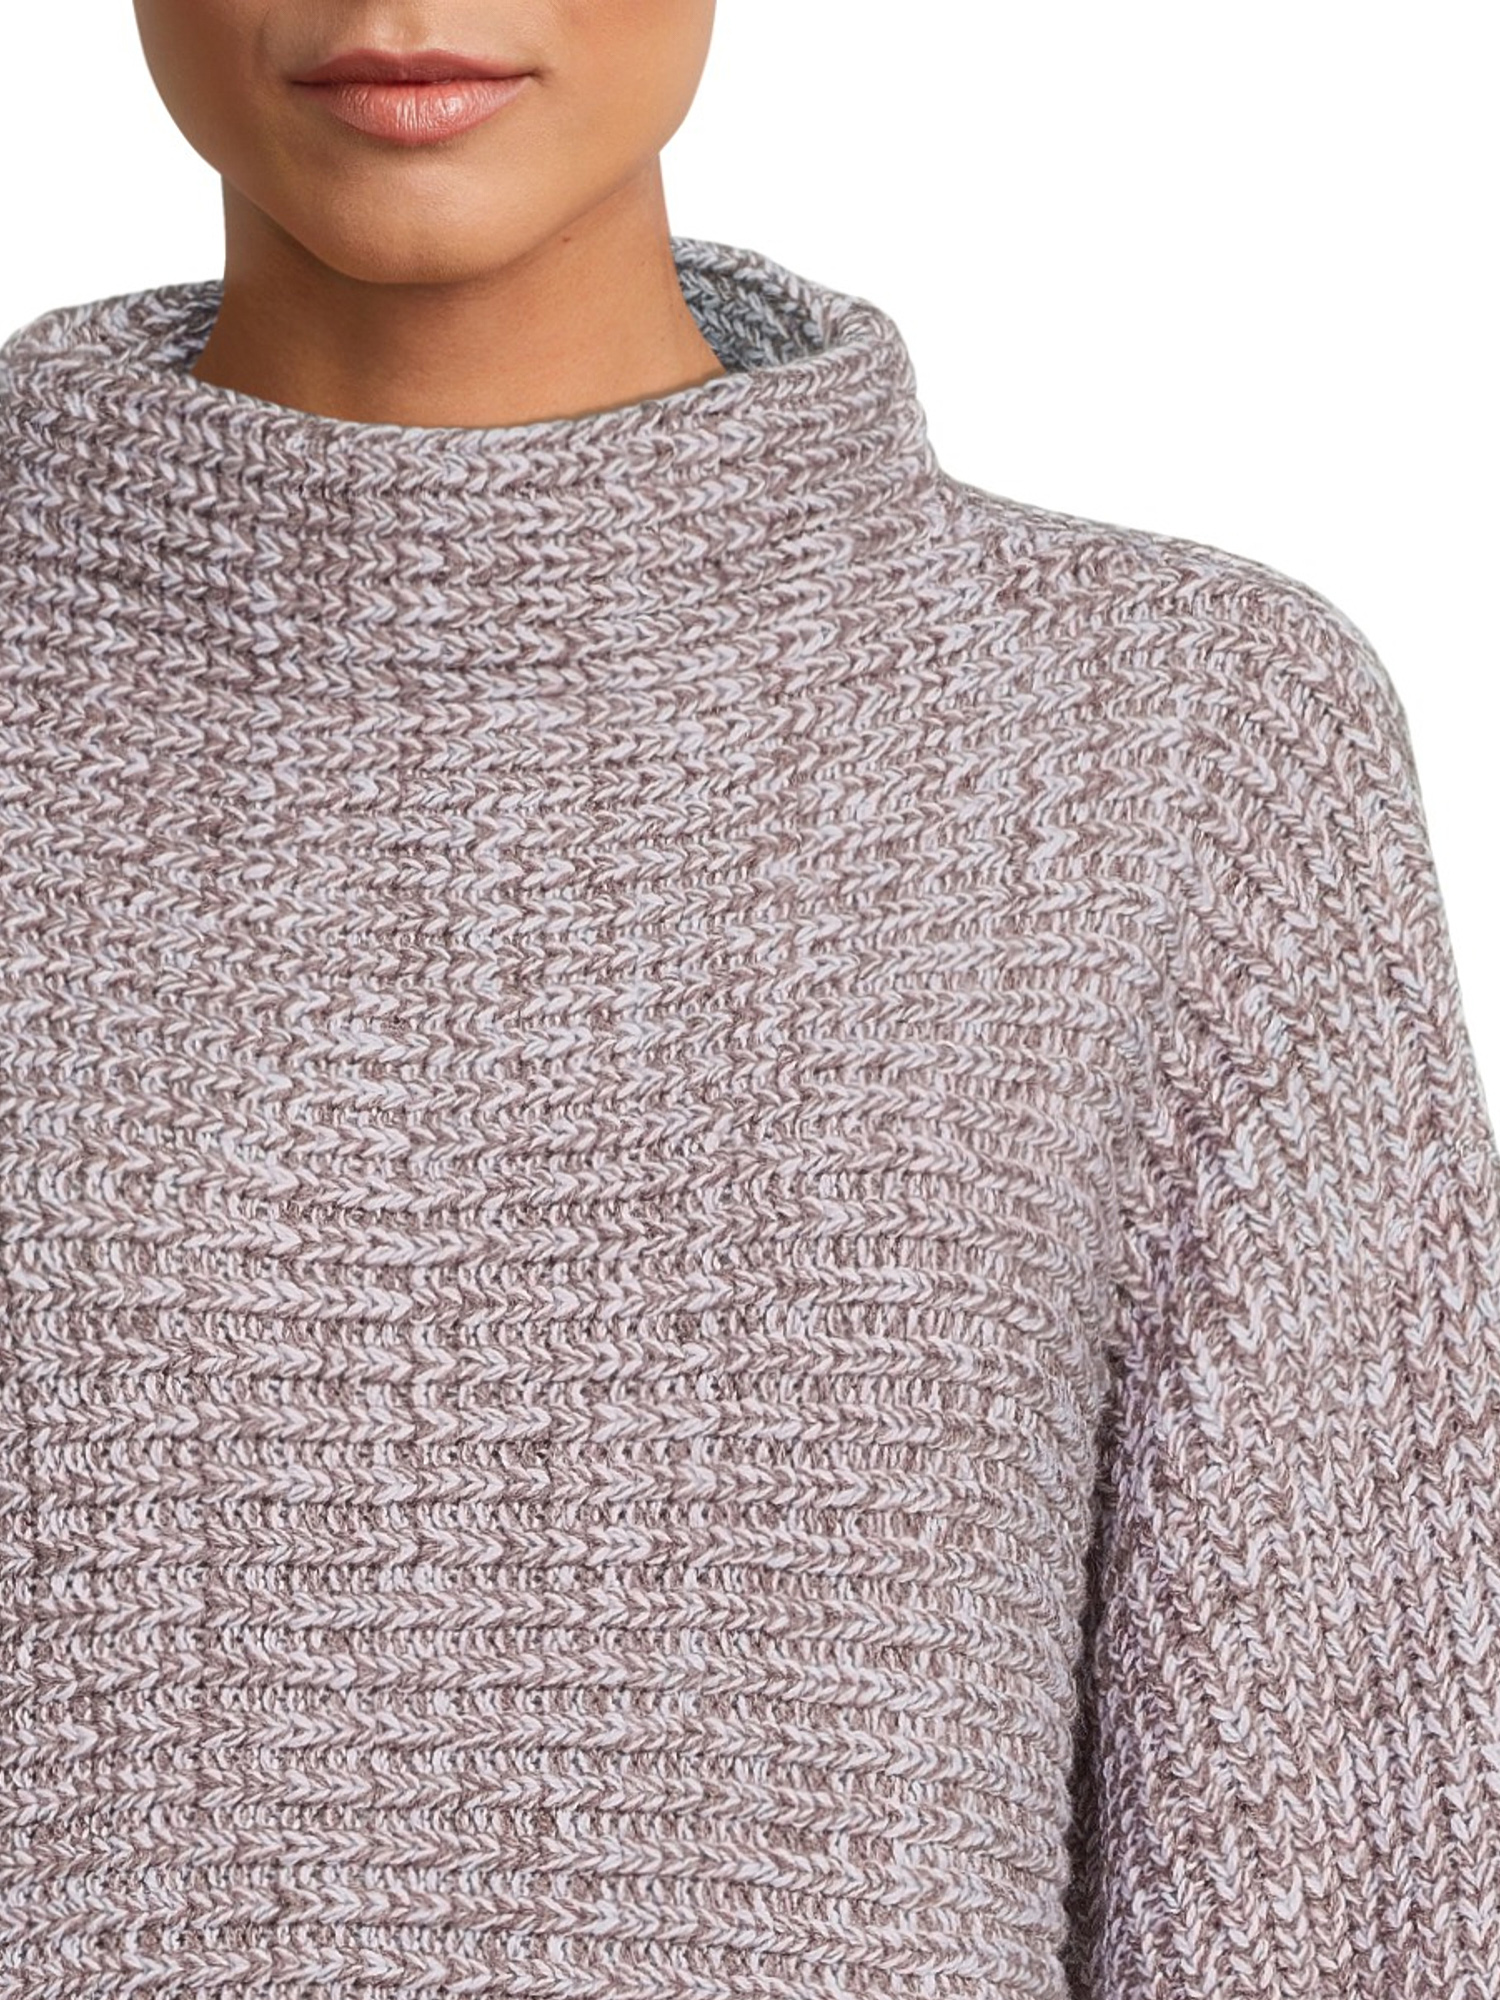 Time and Tru Women's Horizontal Shaker Knit Sweater - image 3 of 5